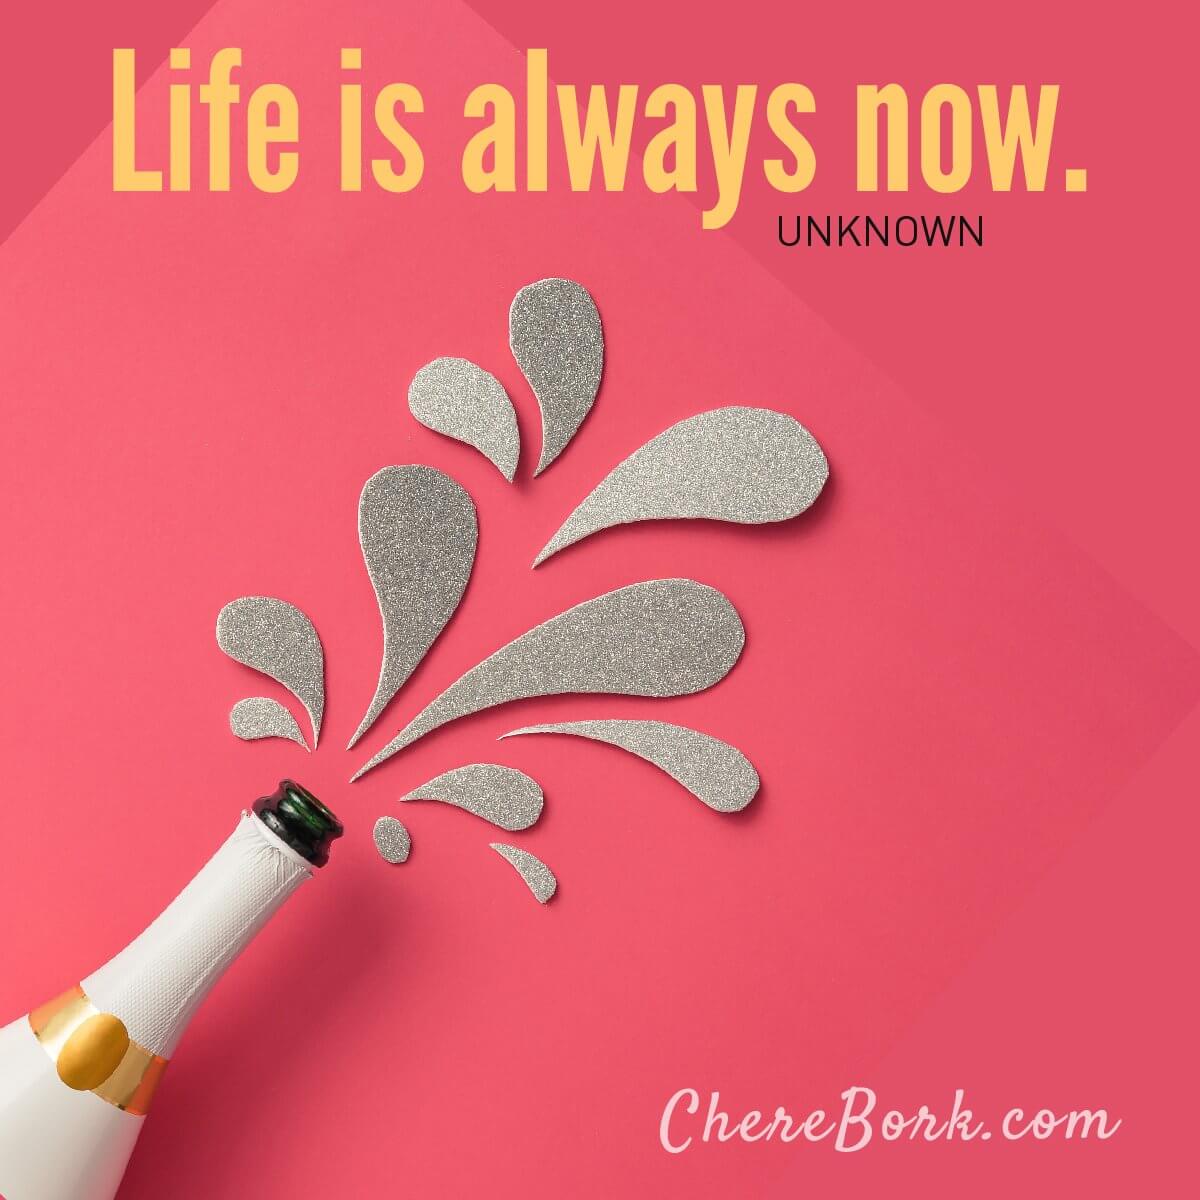 Life is always now. -Unknown